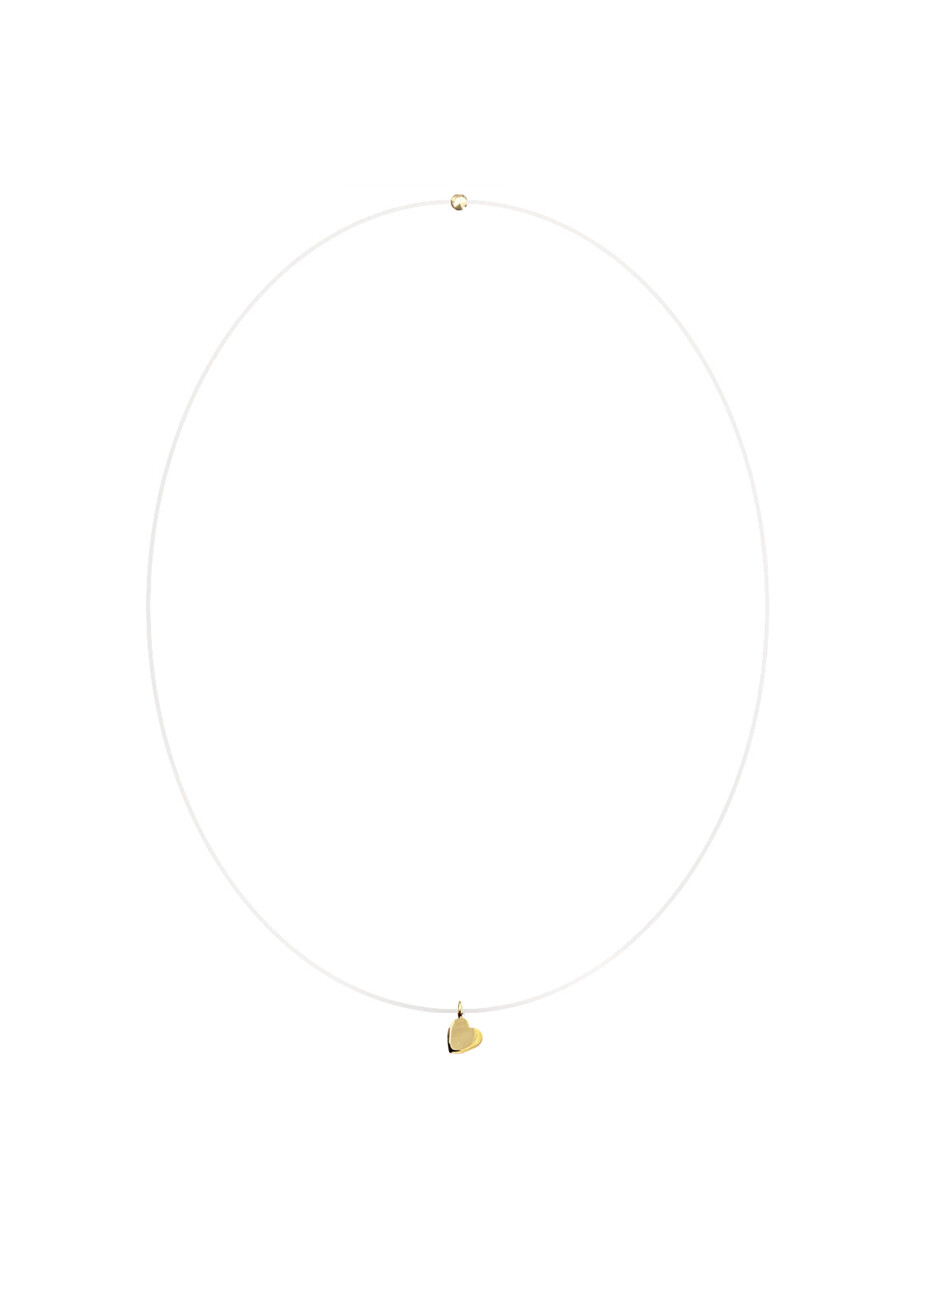 Invisibile micro heart, star or moon in 18kt solid gold